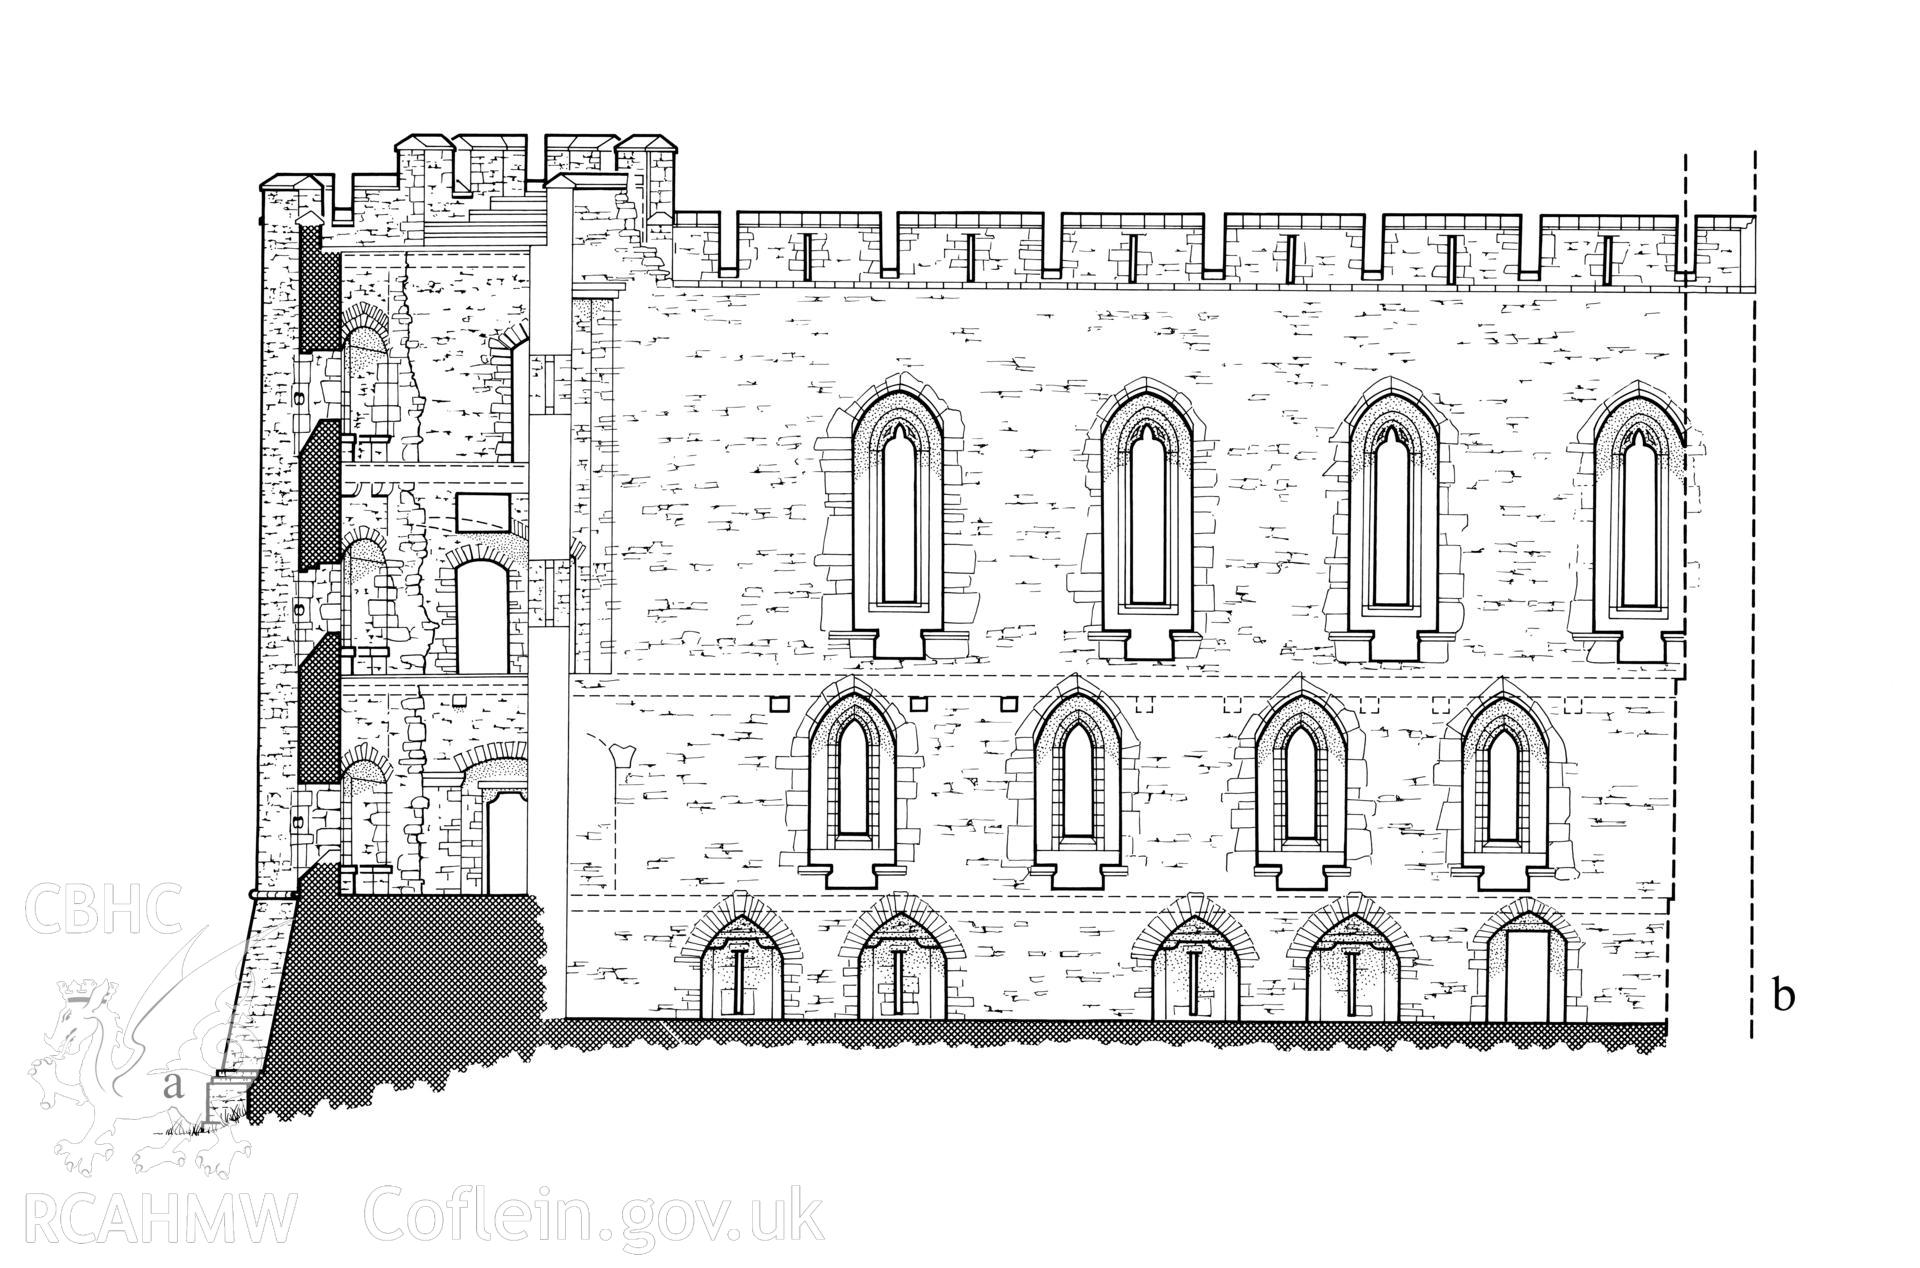 Measured drawing showing elevation of Brecon Castle, produced by RCAHMW